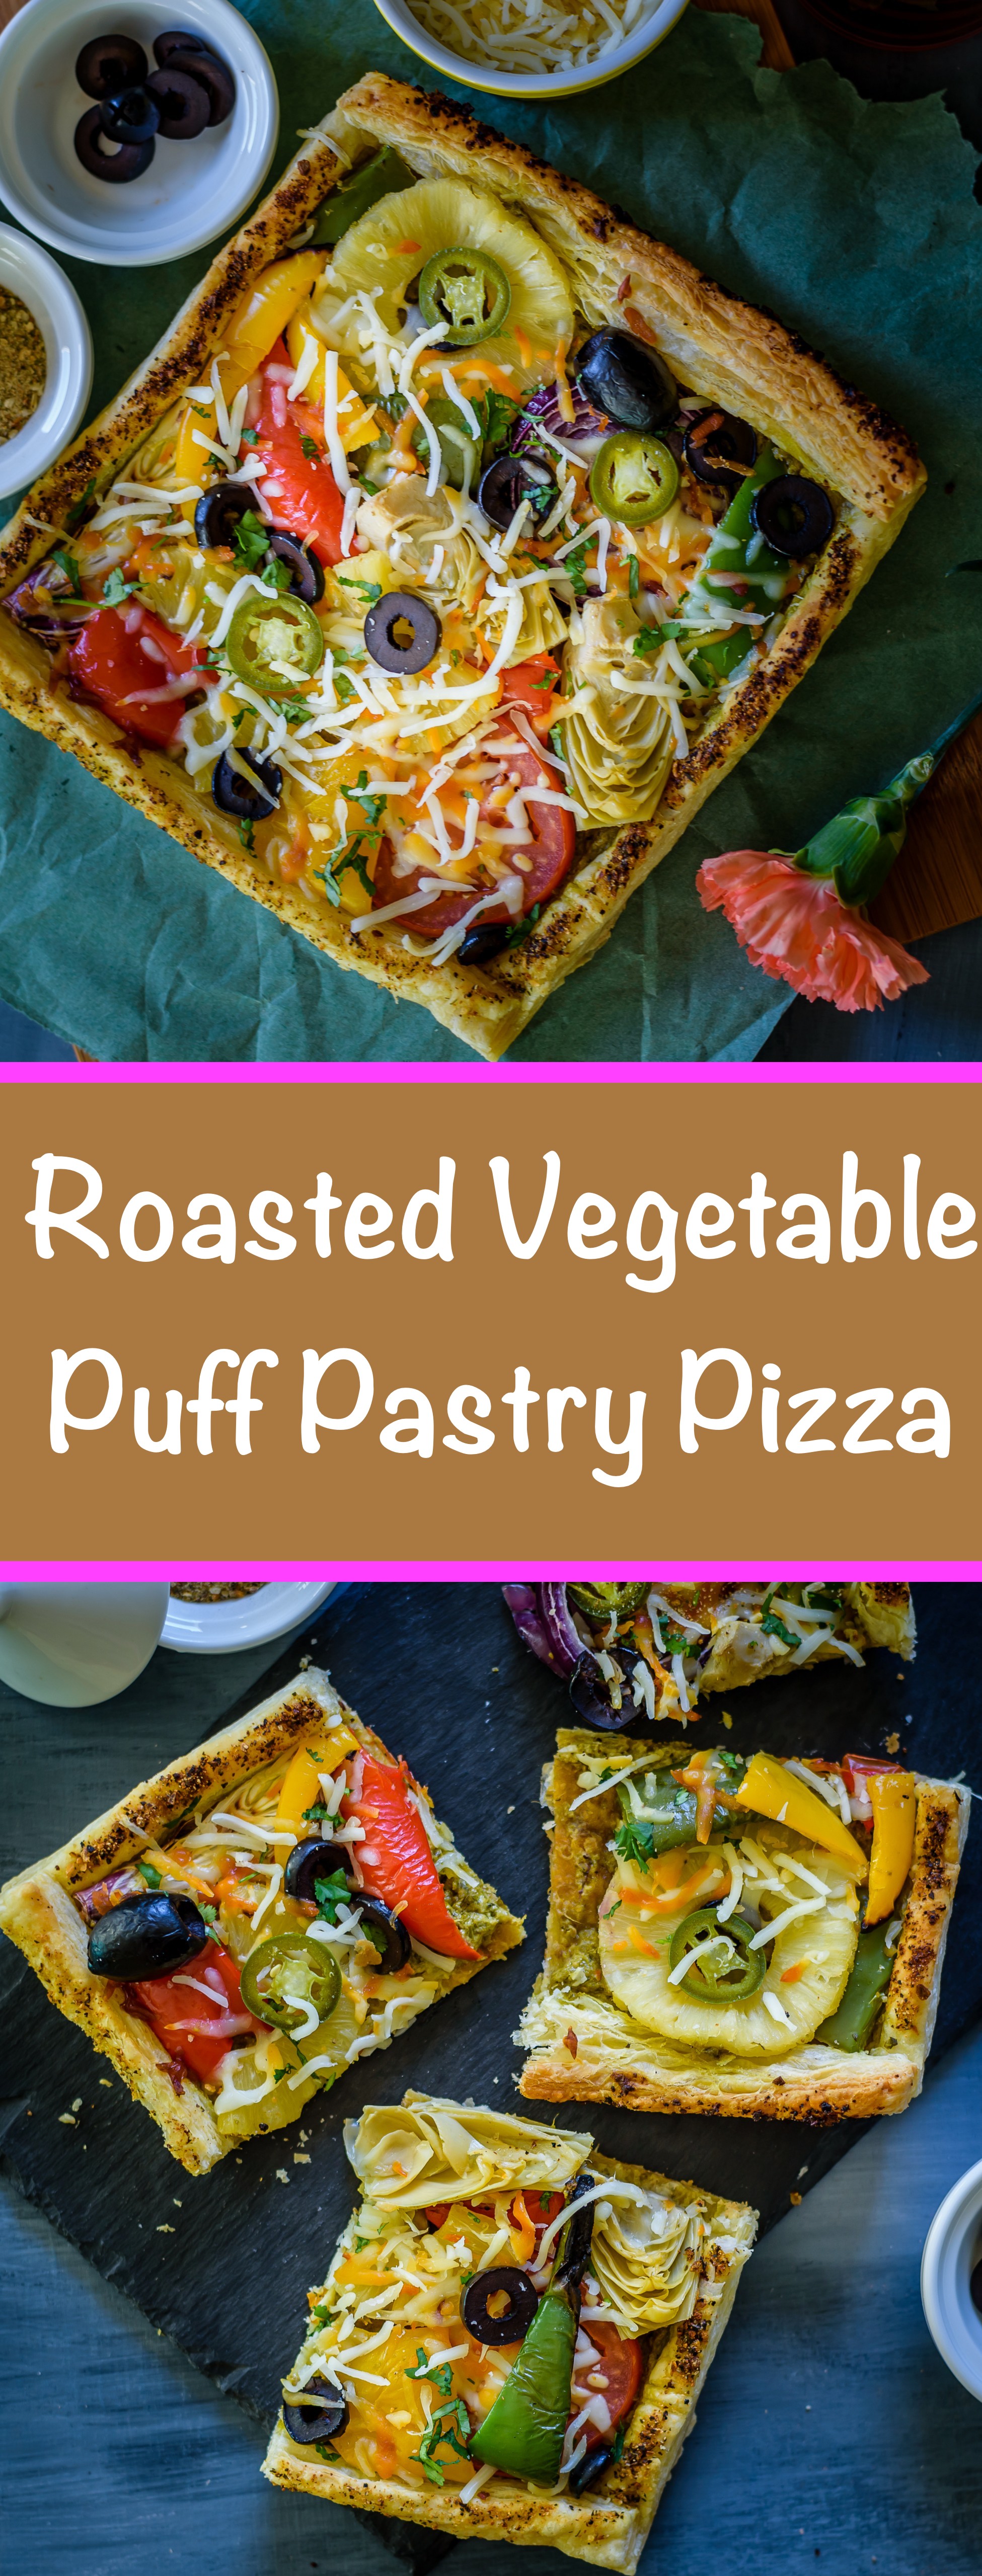 This Roasted Vegetable Puff Pastry Pizza is the perfect healthy comfort food. The simple puff pastry base makes this semi-homemade meal quick enough for a weeknight meal, but fancy enough for a date night in when you're cooking for two.